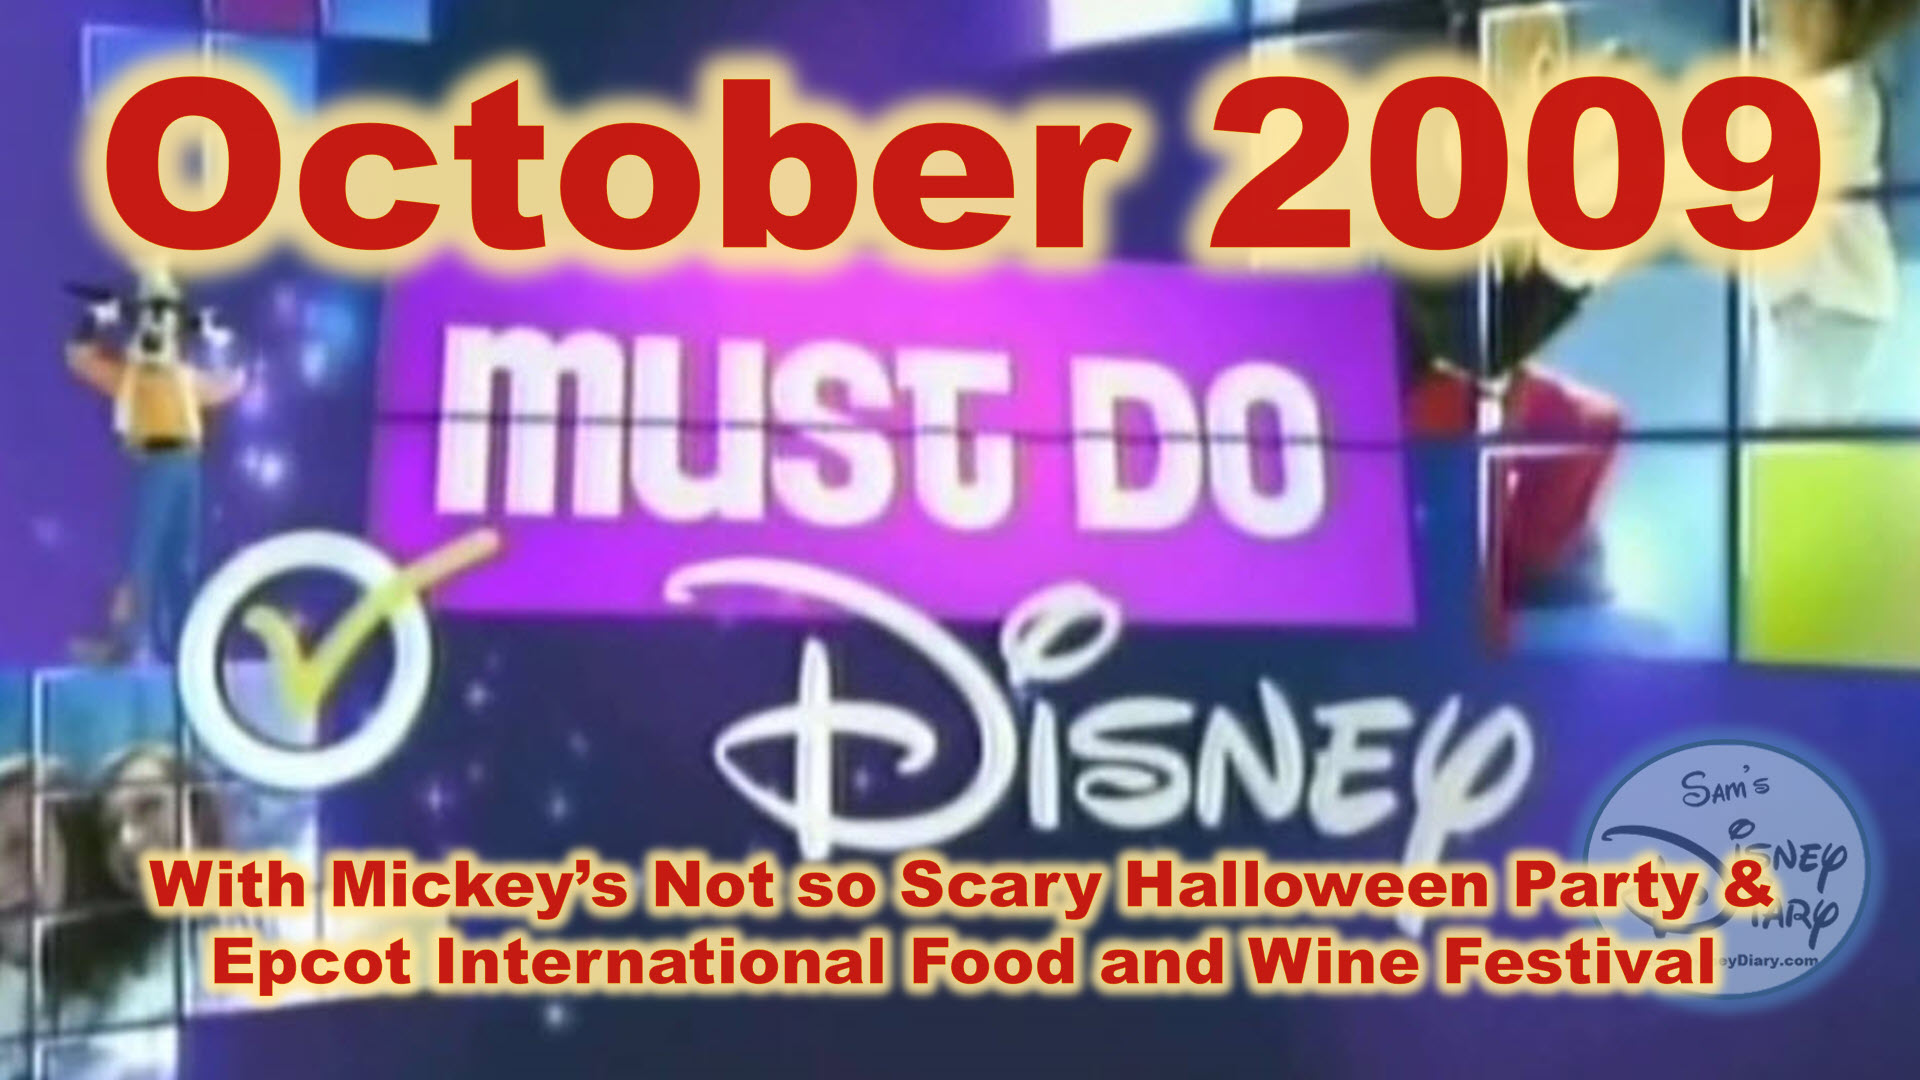 Must Do Disney October 2009 with MNSSHP and Epcot Food and Wine Festival